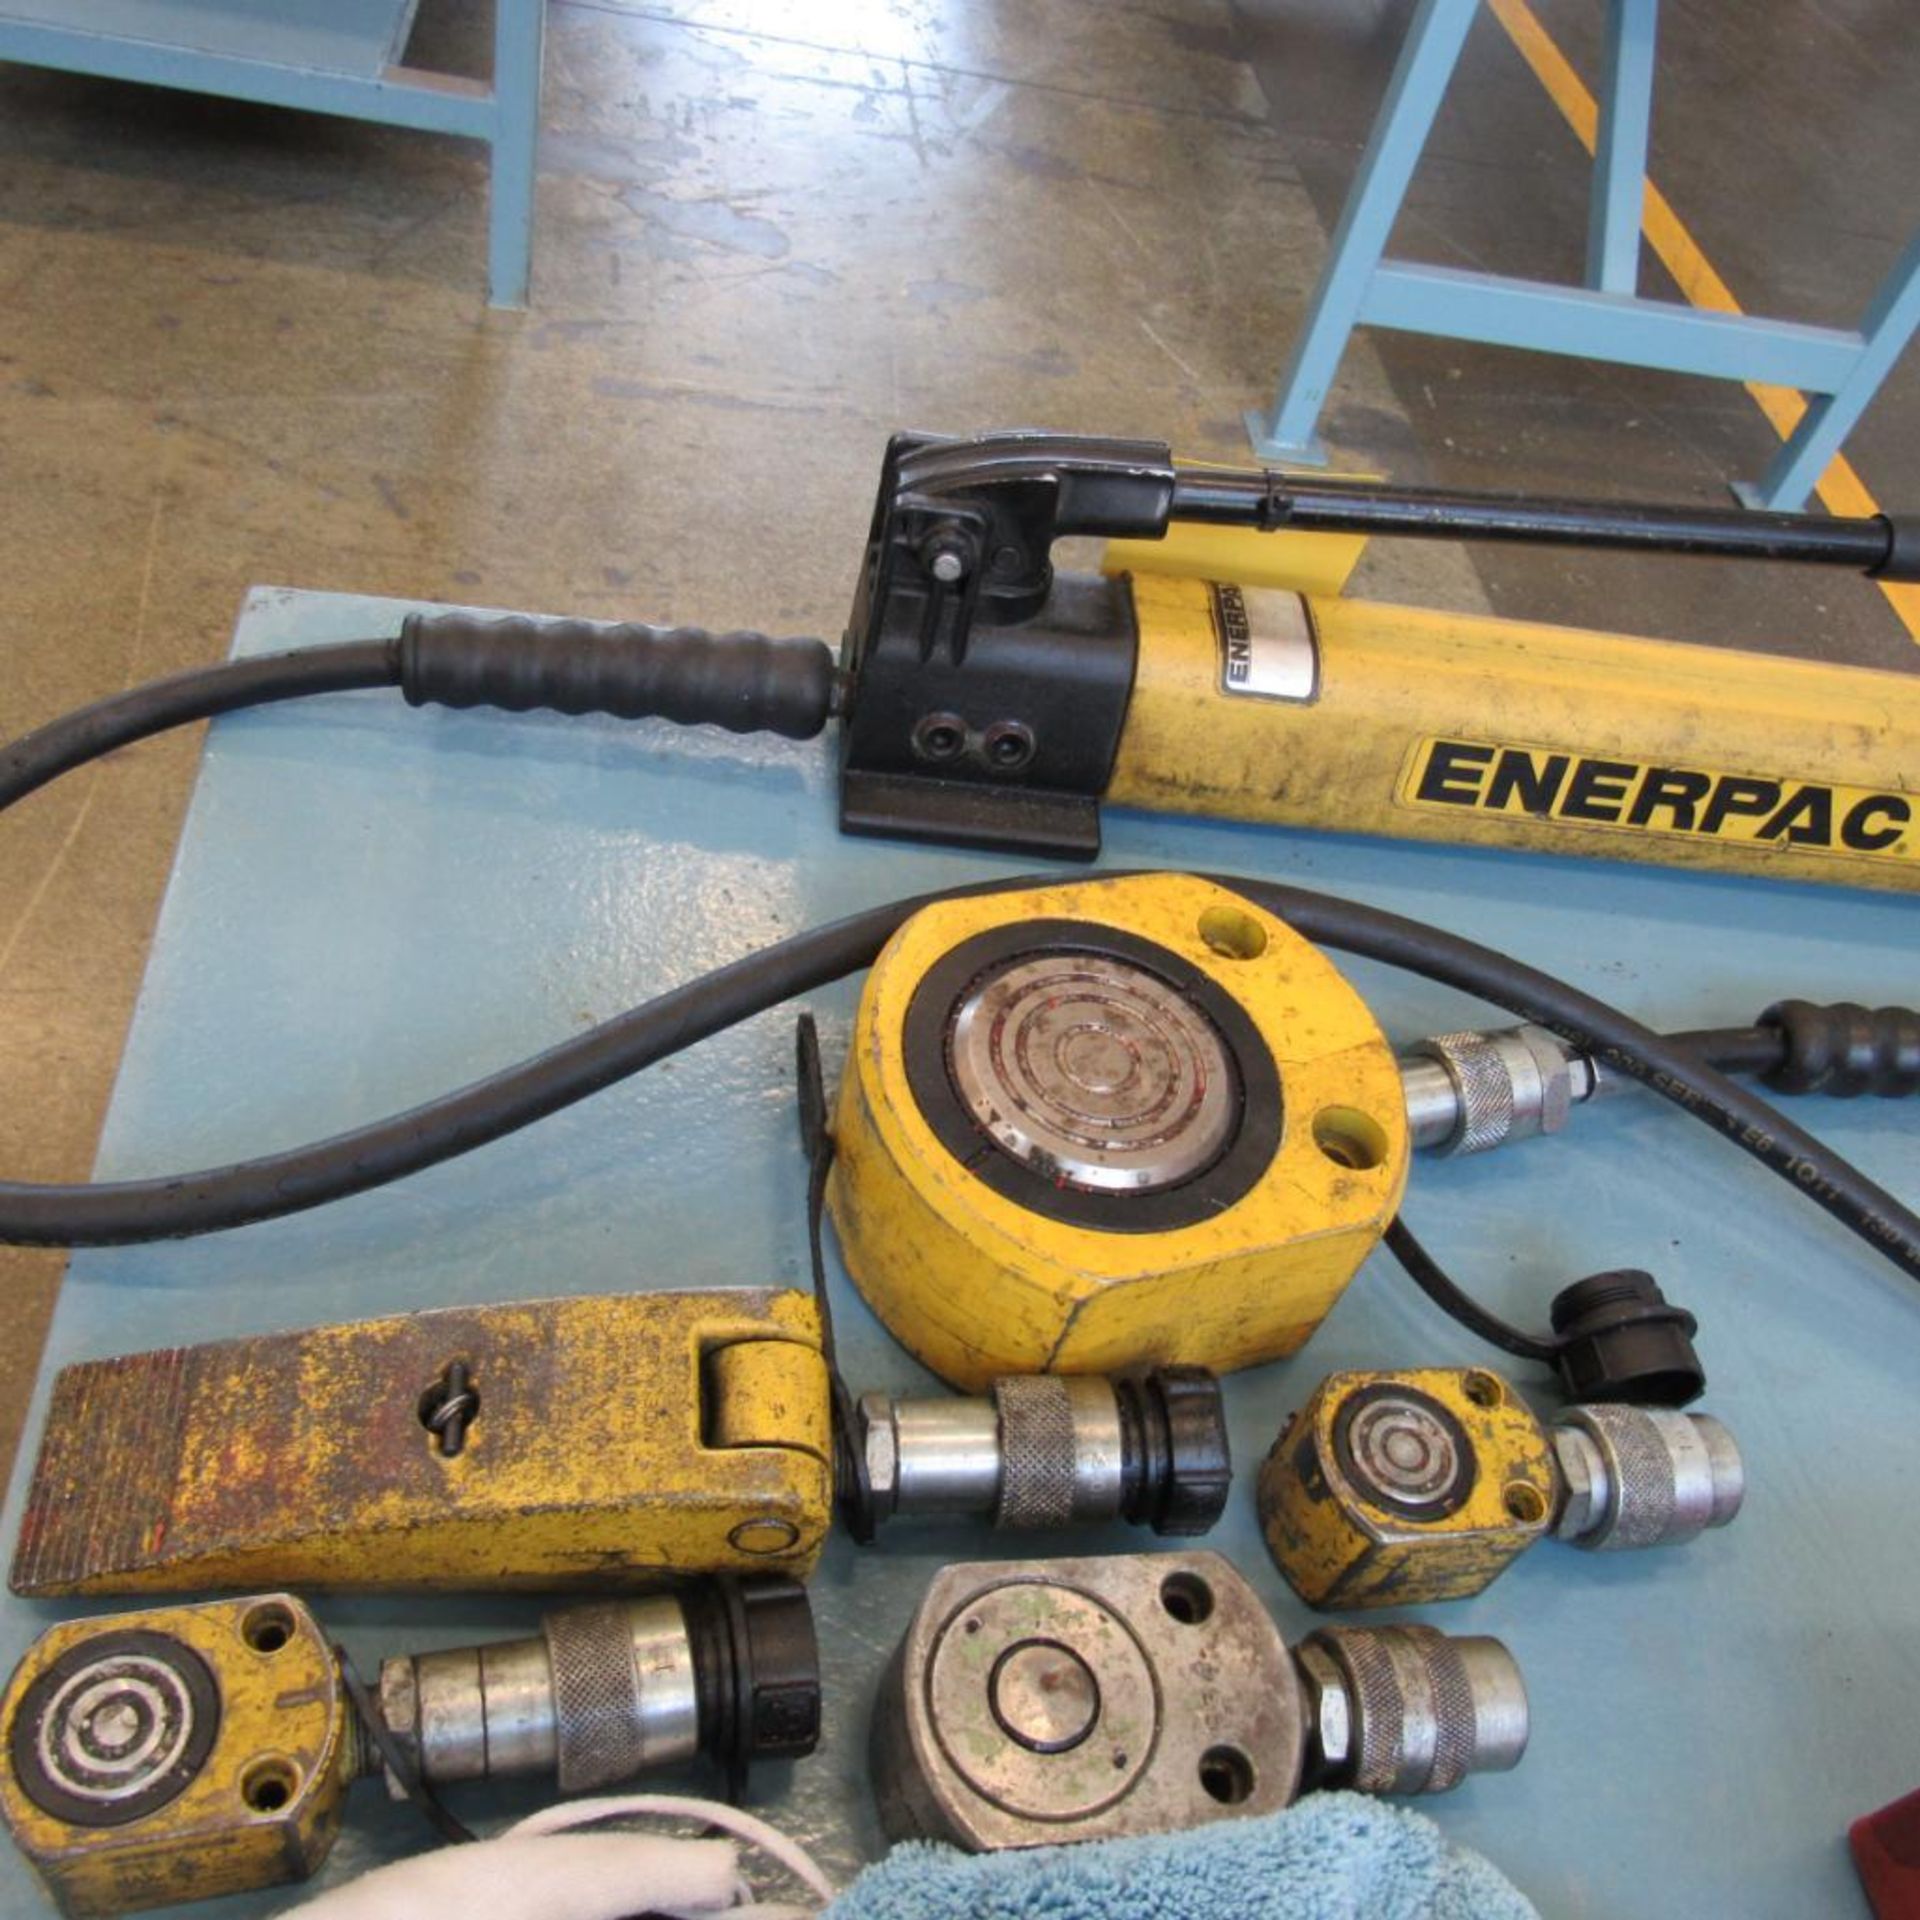 Assorted Enerpac Hydraulic Pump w/Accessories (Location: Bldg. 3) - Image 2 of 2